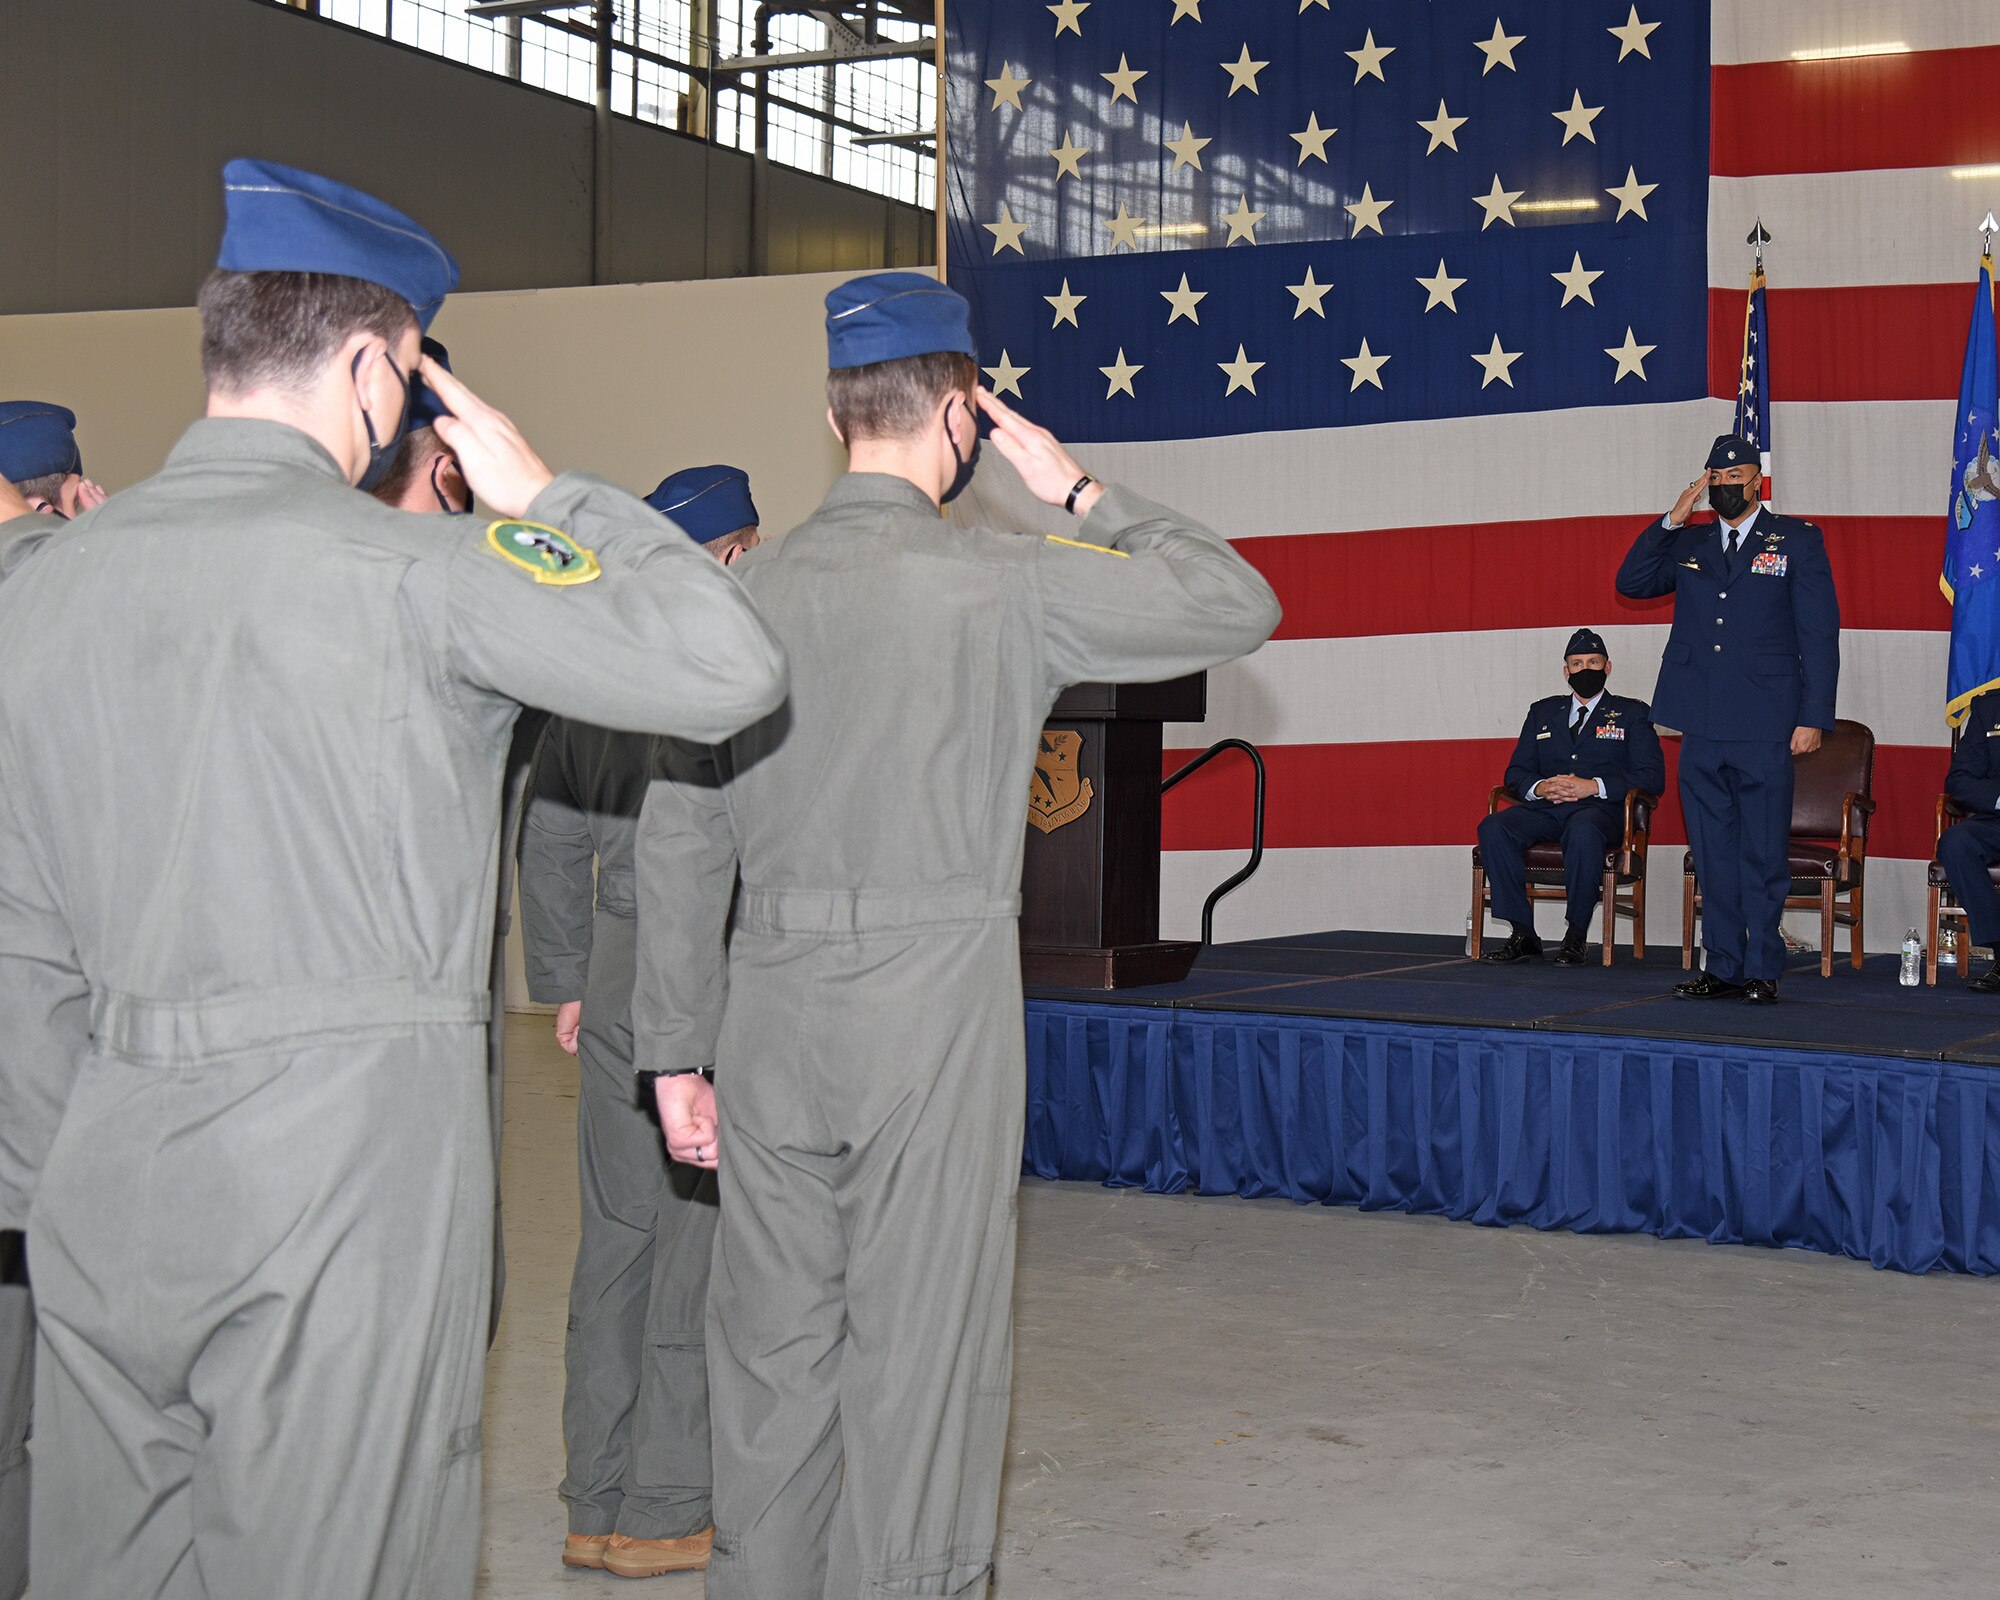 Members of the 49th Fighter Training Squadron salute Lt. Col. Aaron Jones, 49th FTS incoming commander Dec. 16, 2021, on Columbus Air Force Base, Miss. The 49th FTS teaches newly graduated fighter pilots by operating the T-38 Talon aircraft to conduct flight training as well as fighter fundamentals. (U.S. Air Force photo by Elizabeth Owens)